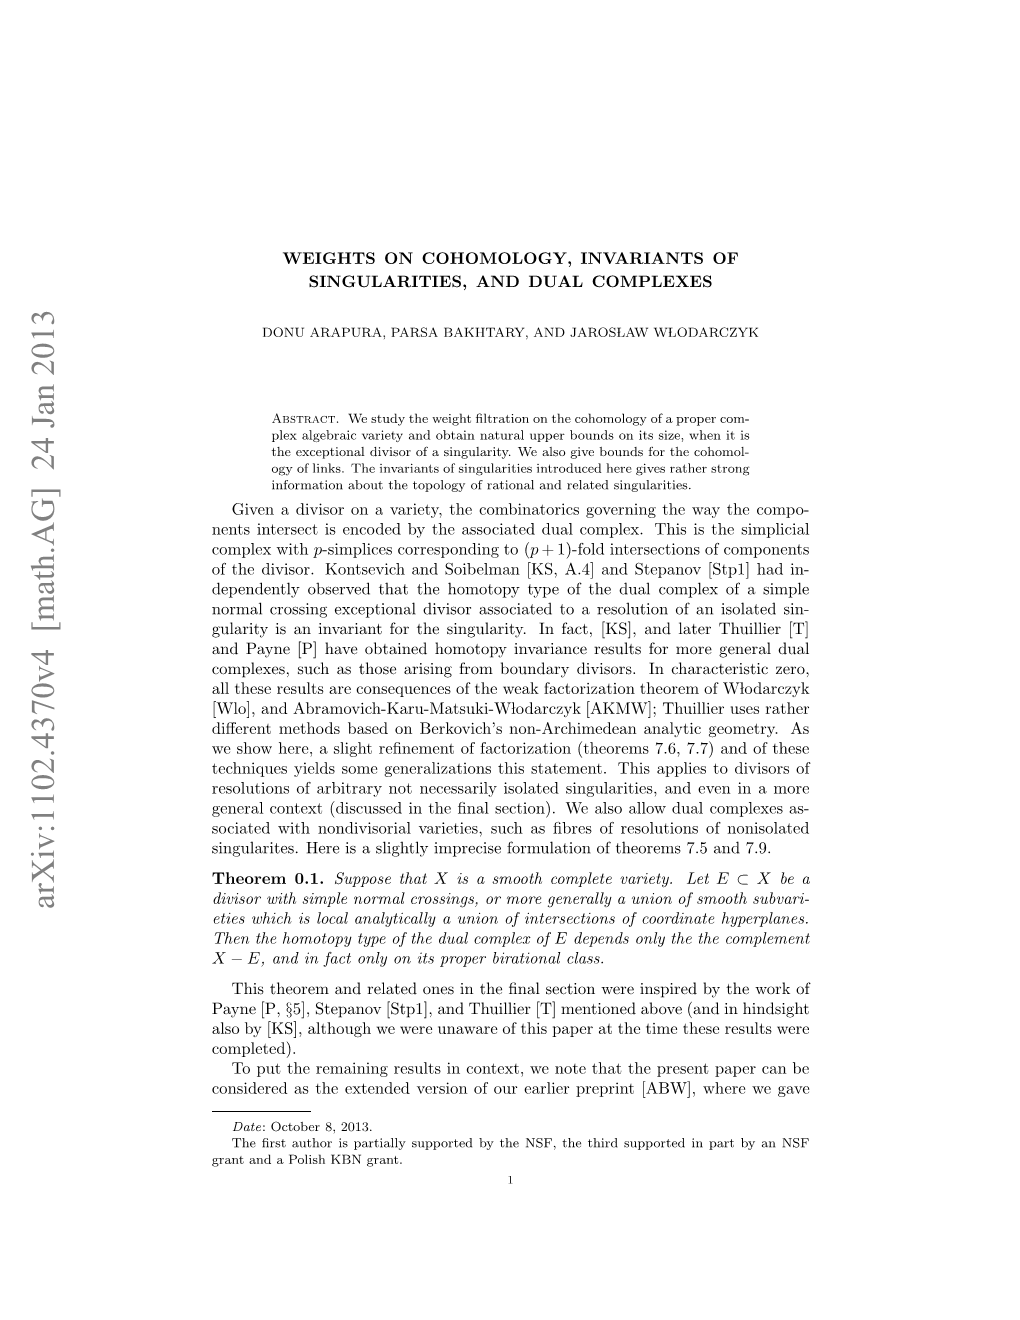 Weights on Cohomology, Invariants of Singularities, and Dual Complexes